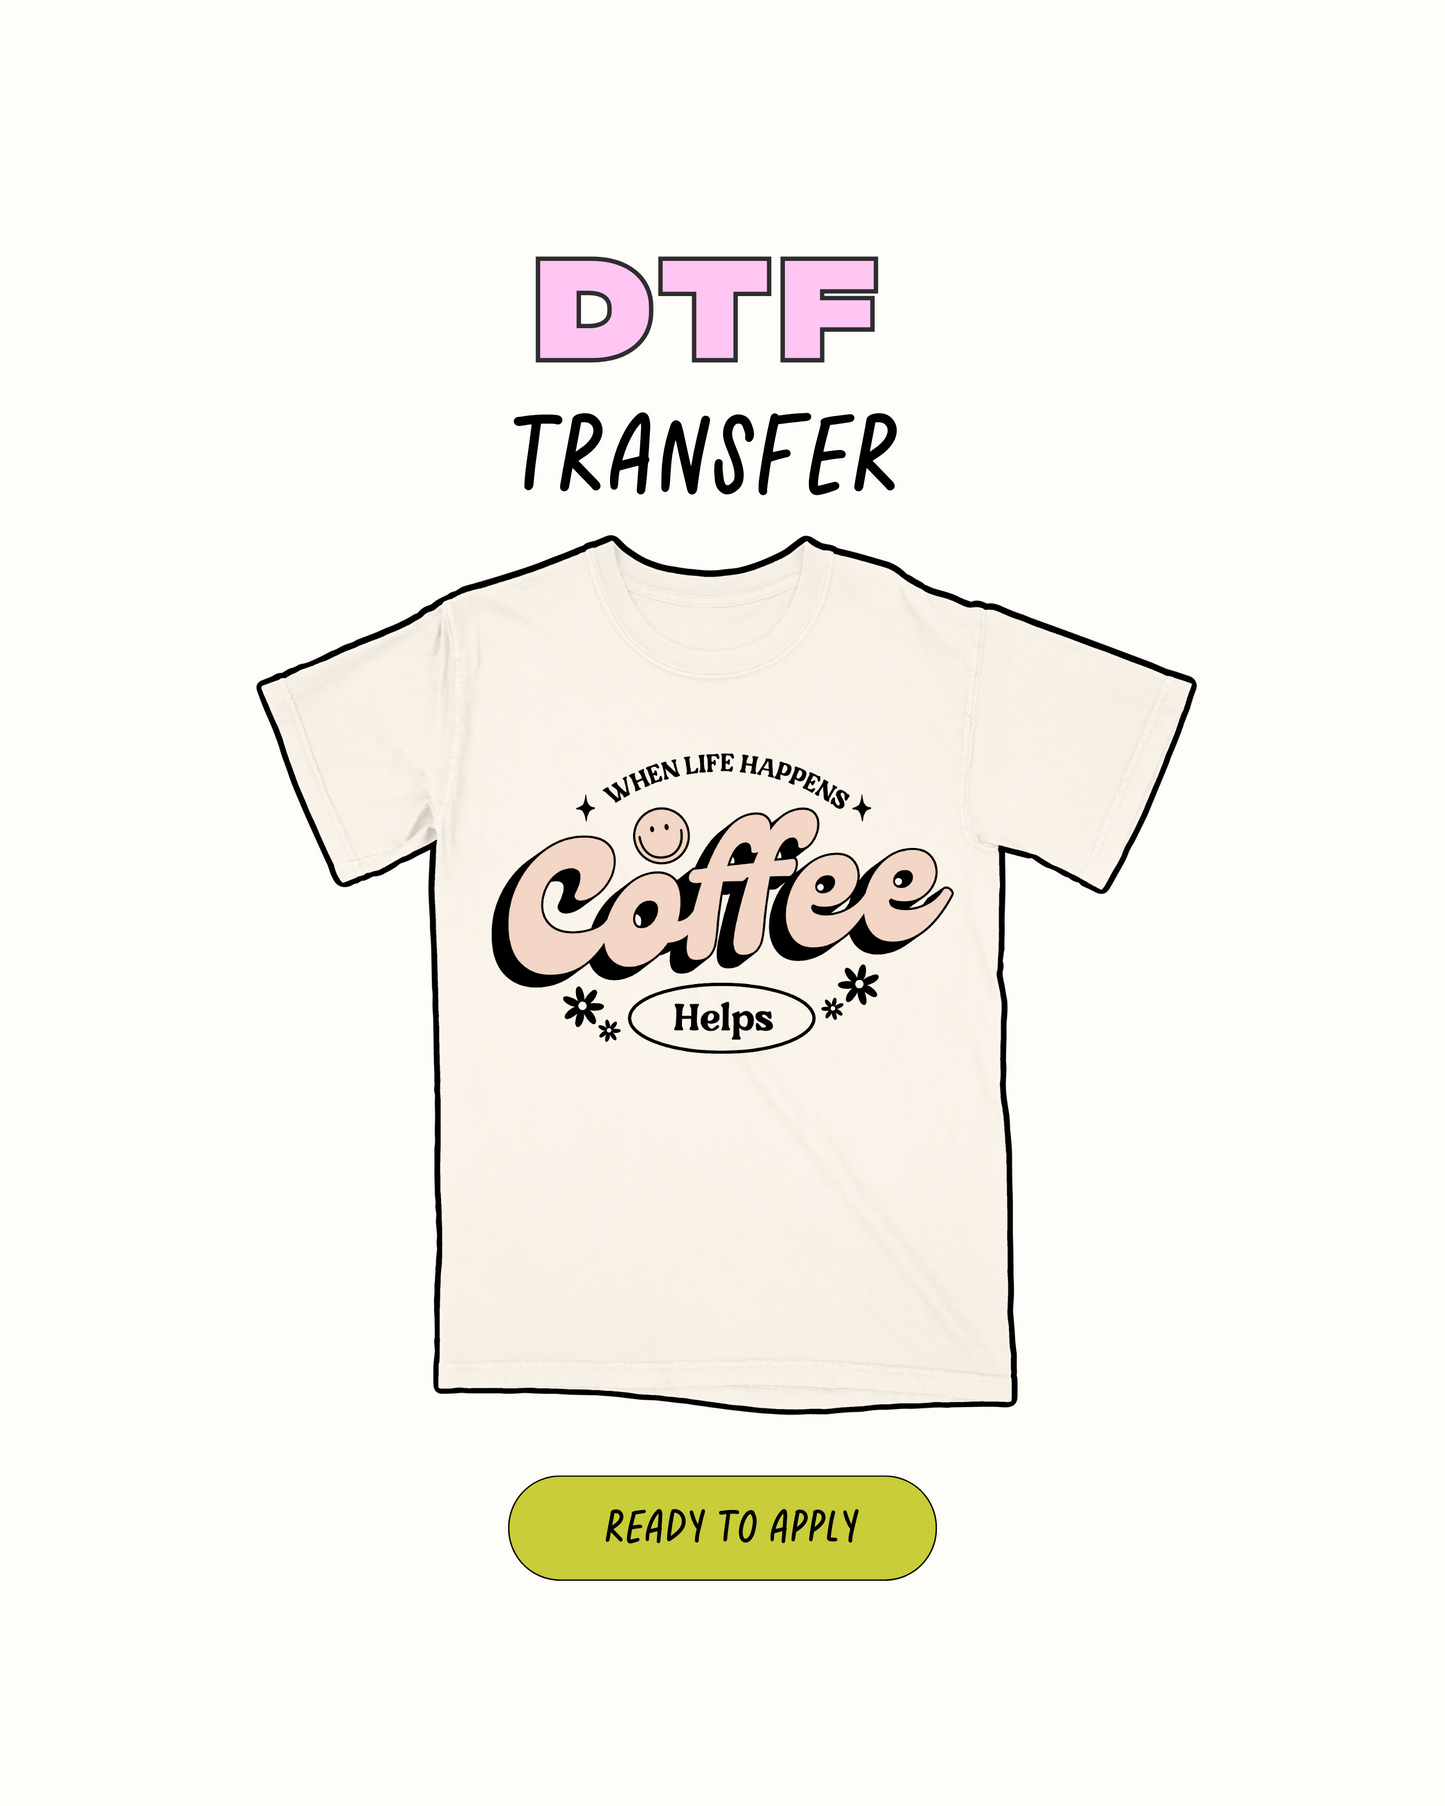 When Life Happens DTF Transfer